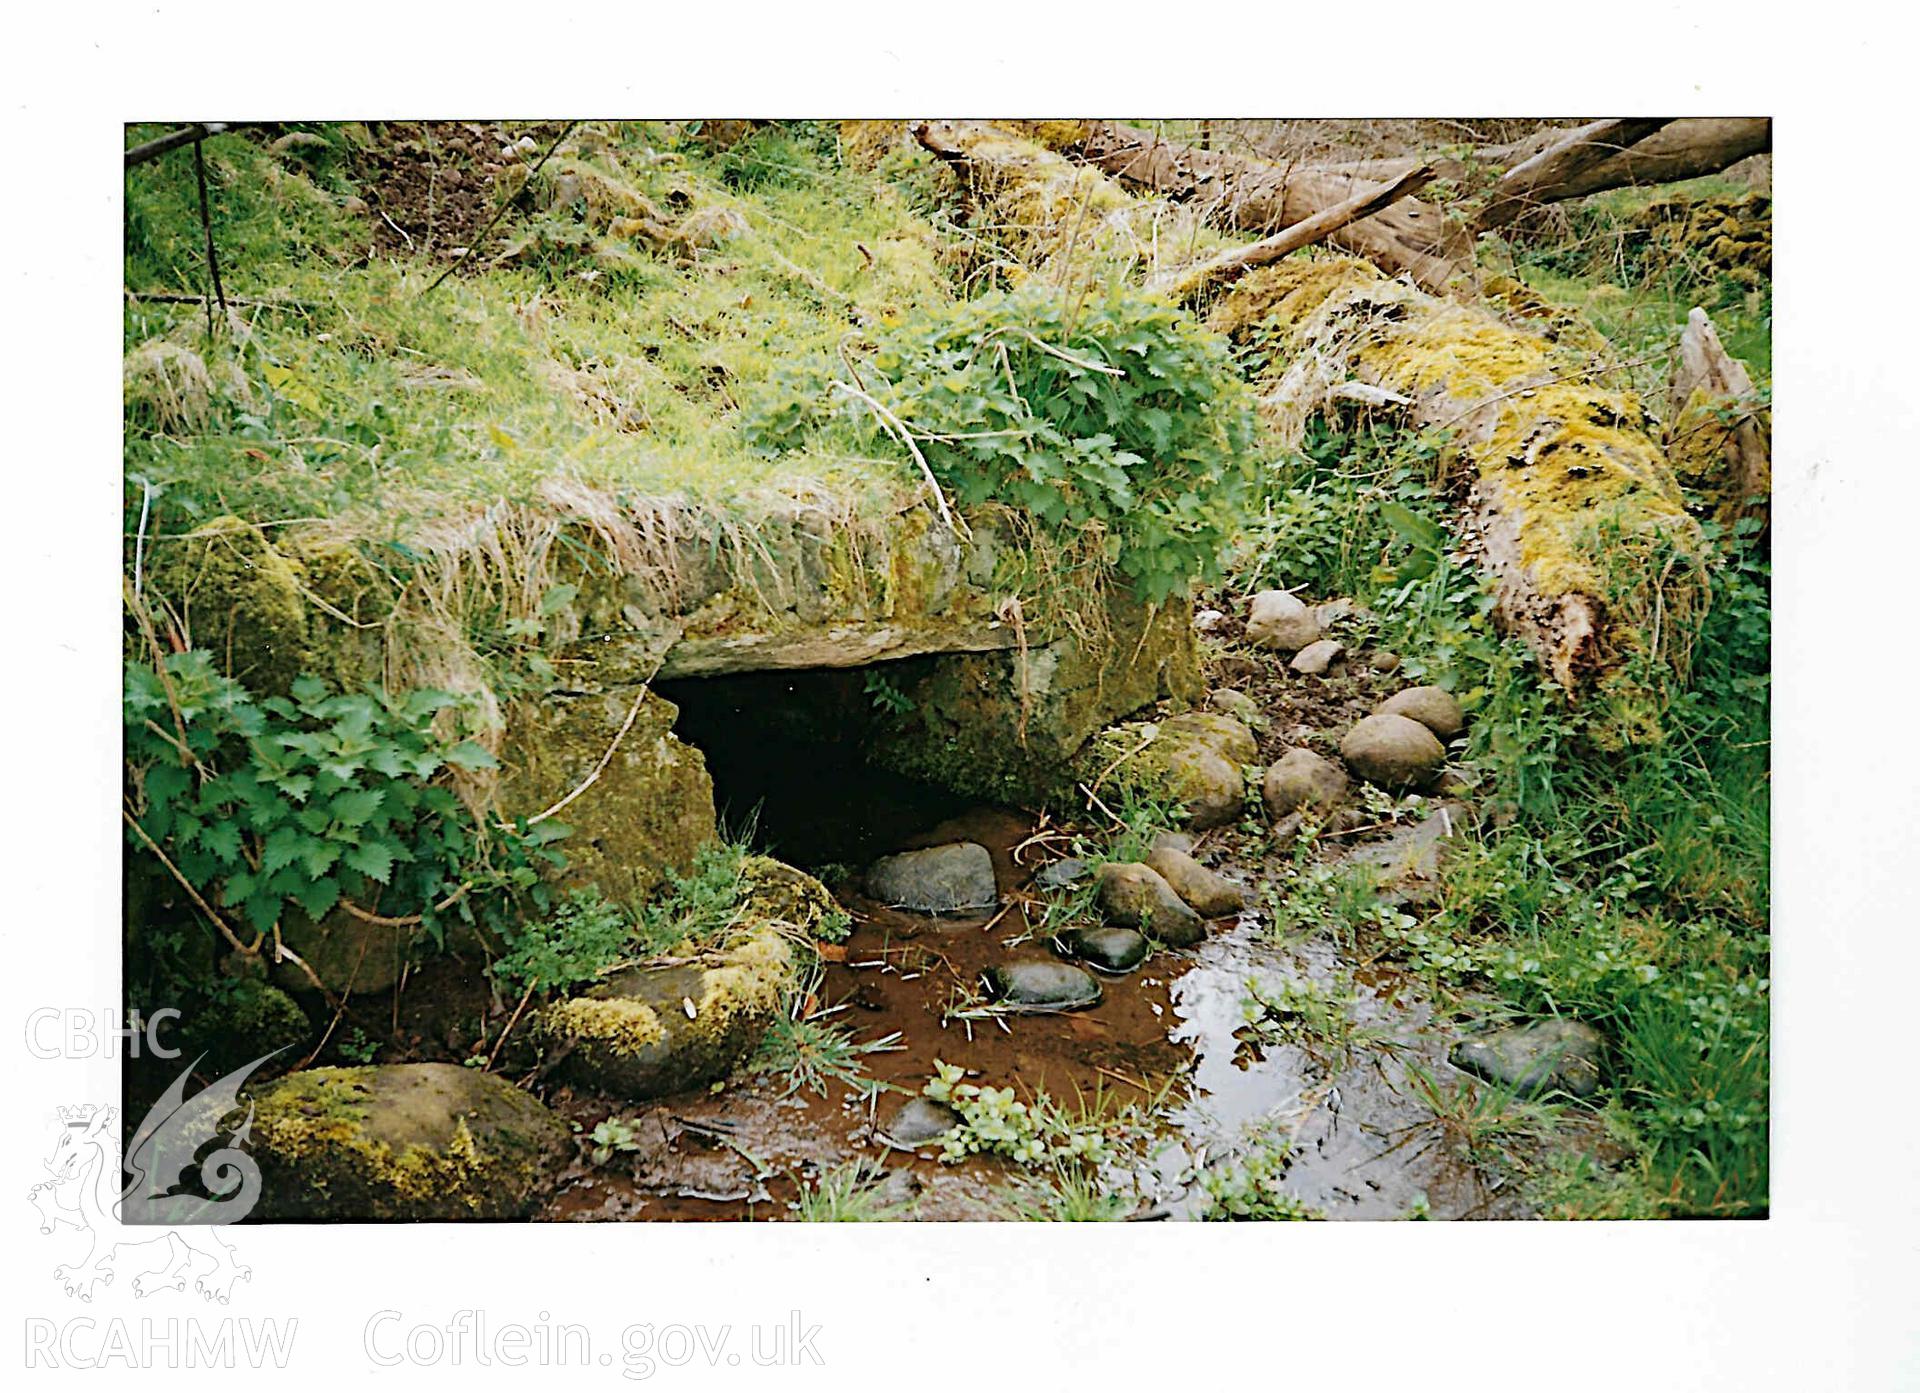 Digitised photograph of Ffynnon Adliw Enclosed Well, produced by Paul Davis in c. 2000